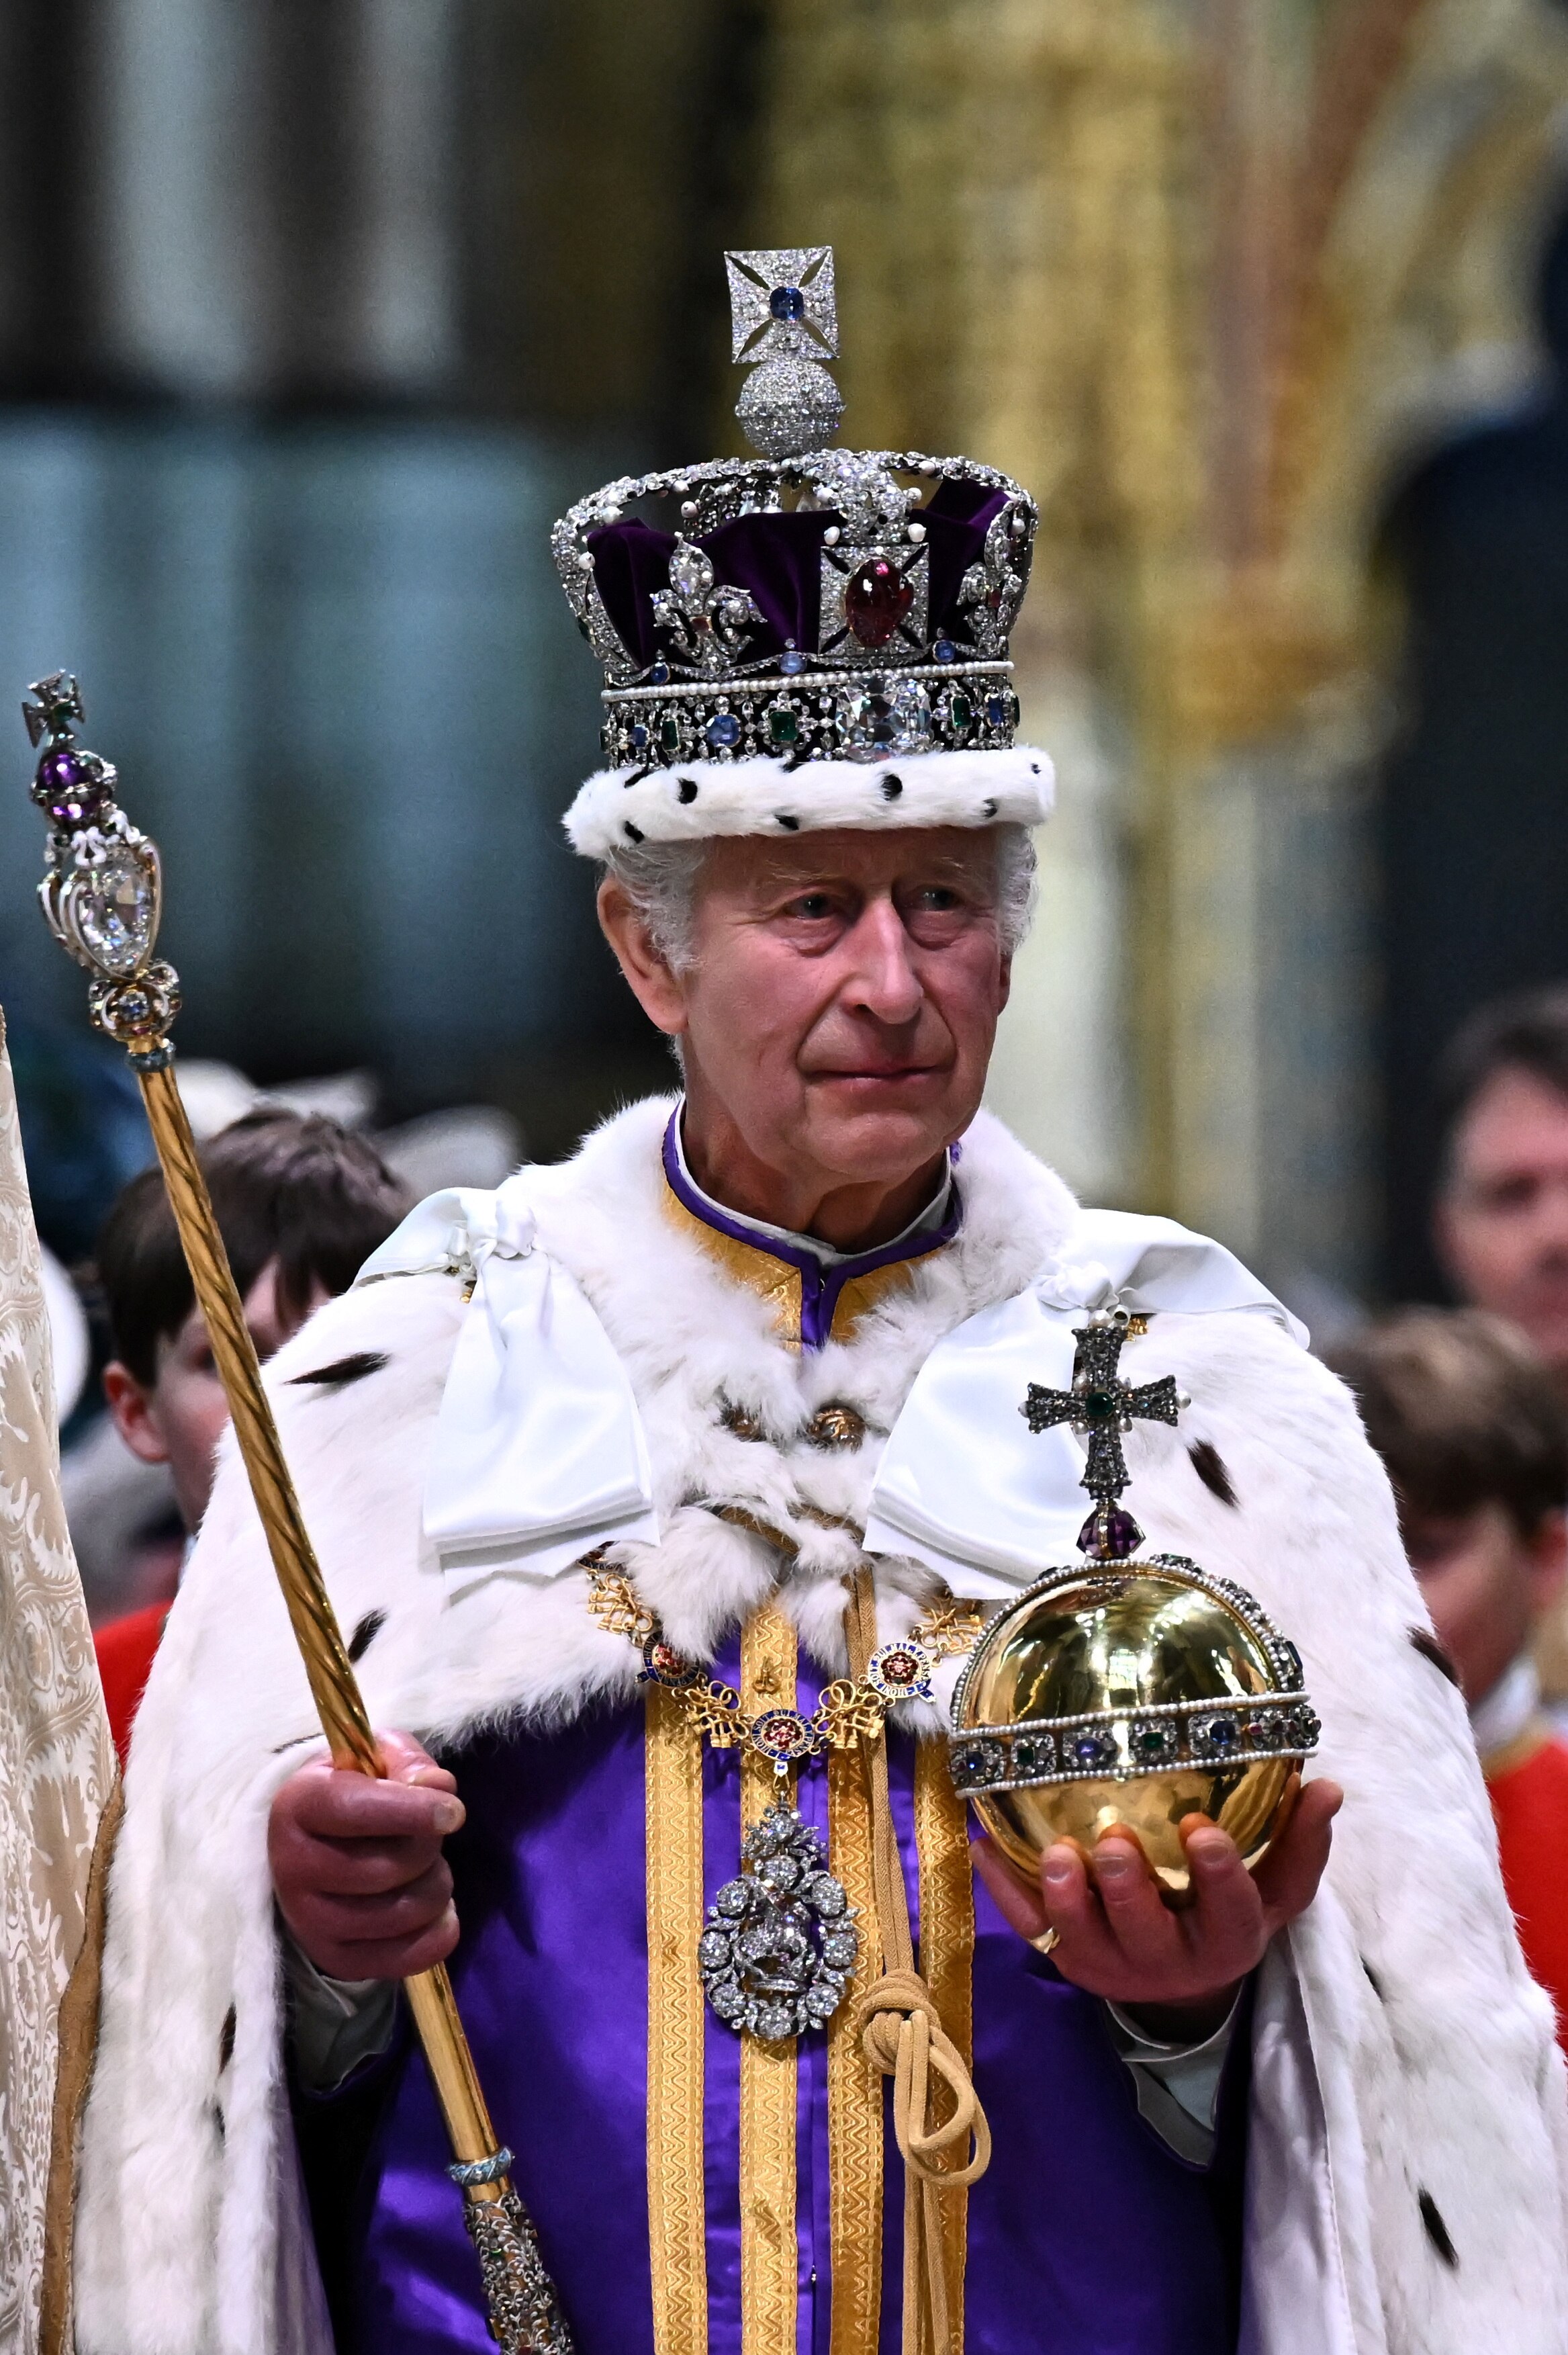 King Charles holds the Sovereign's Orb in his left hand and the Sovereign’s Sceptre with Cross.